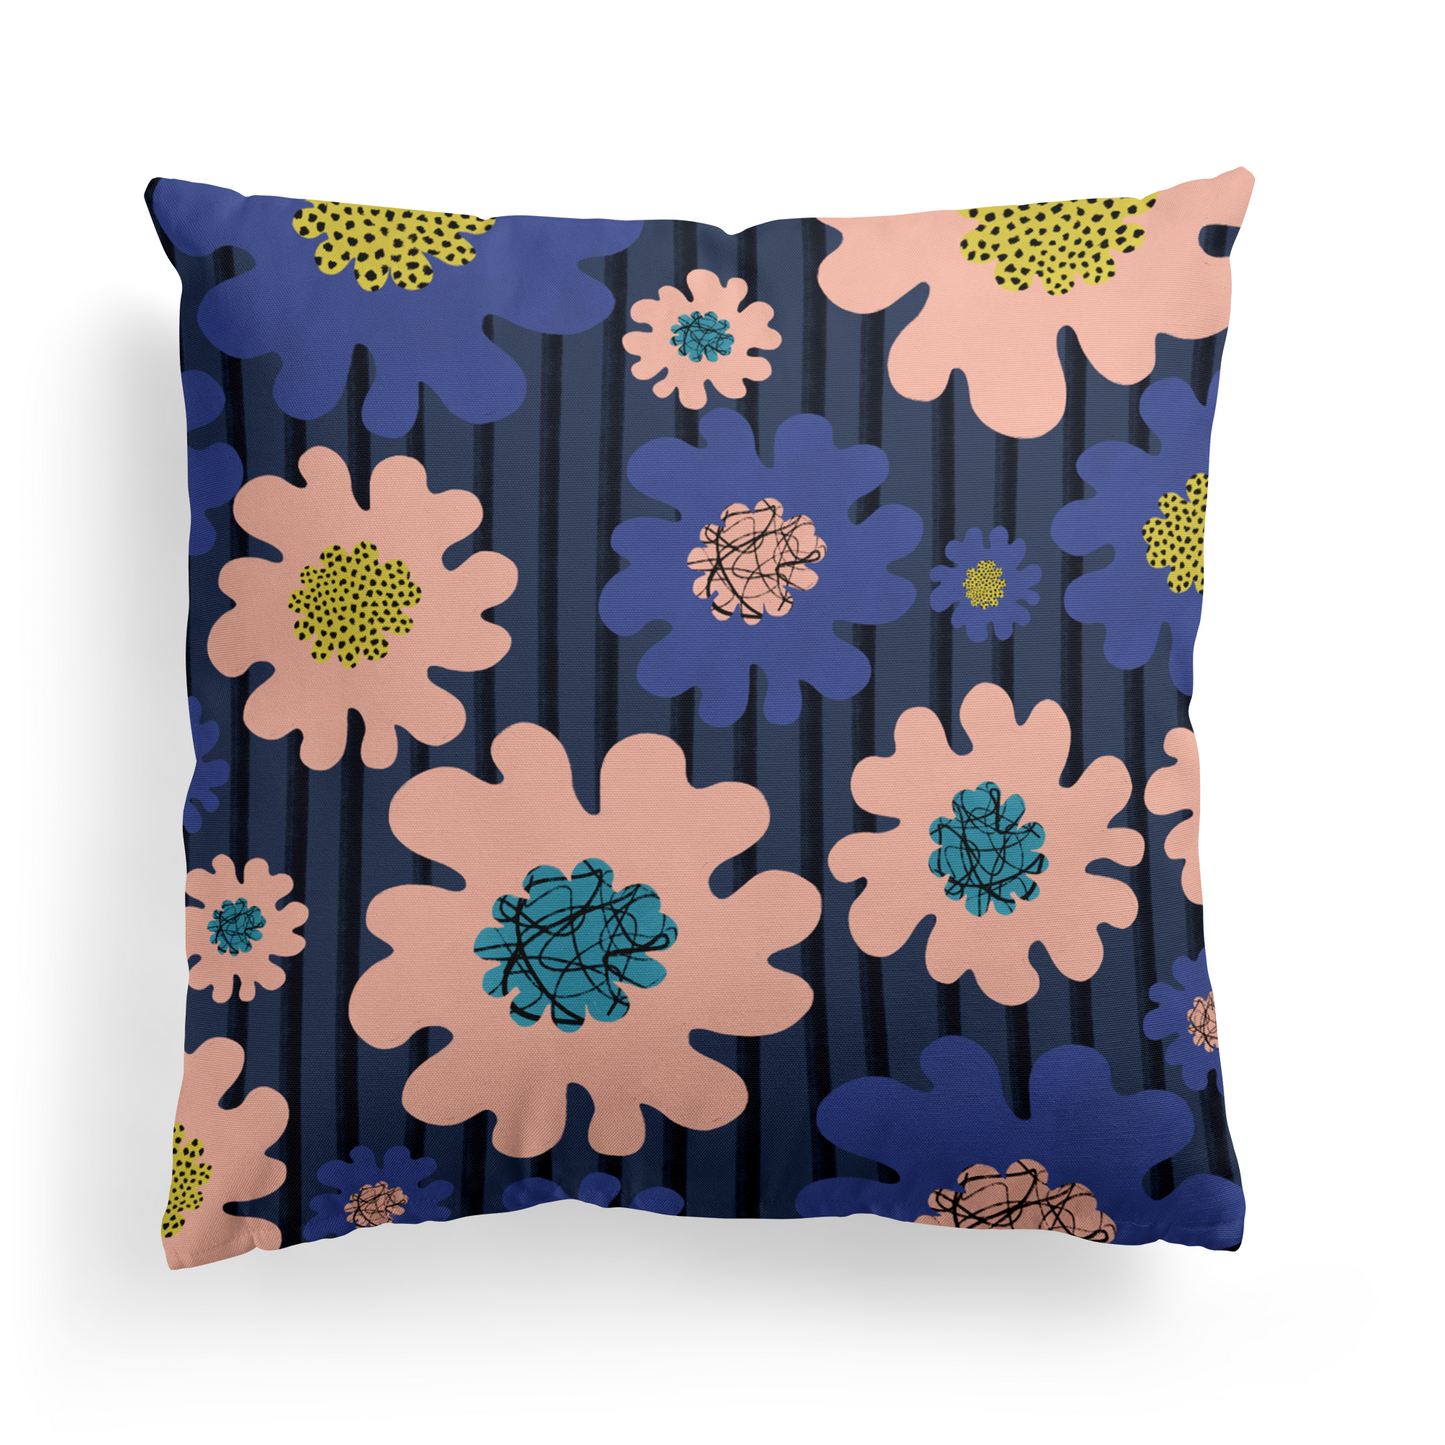 Retro Flower with Striped Pattern Throw Pillow